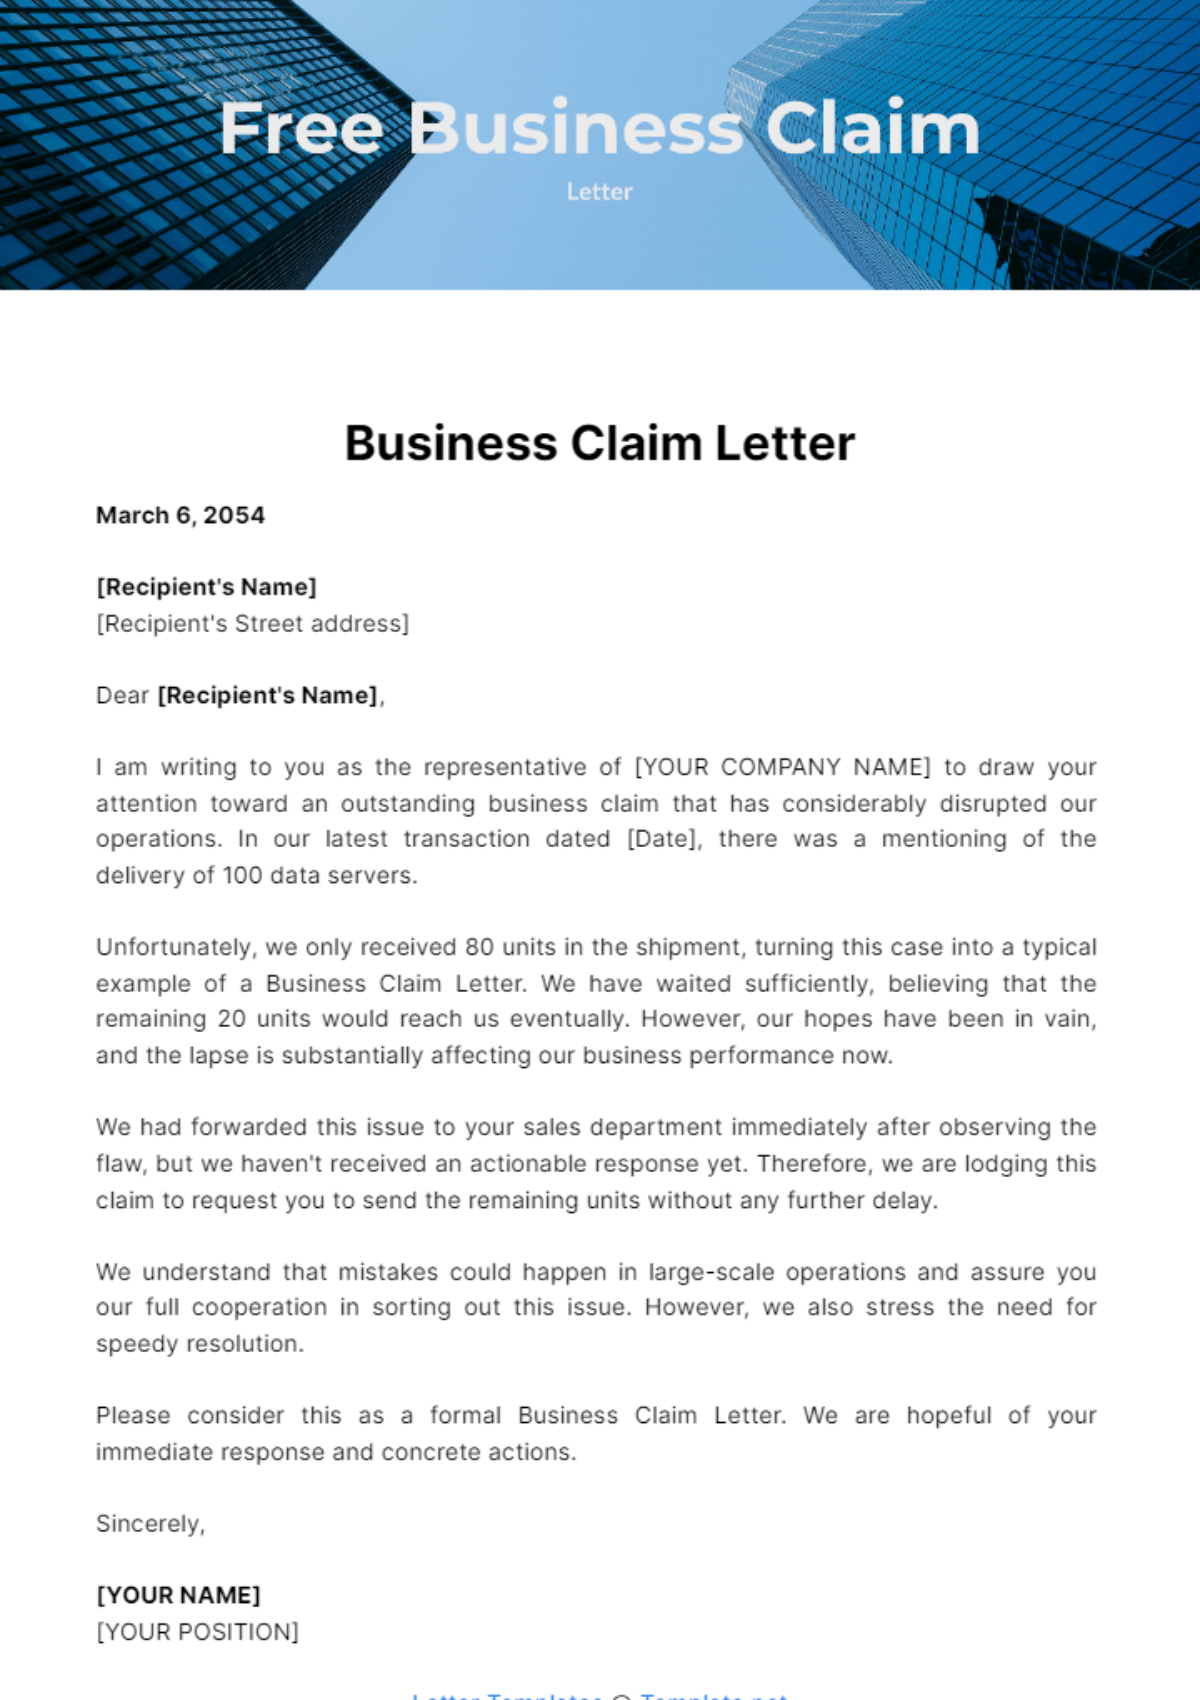 Free Business Claim Letter Template